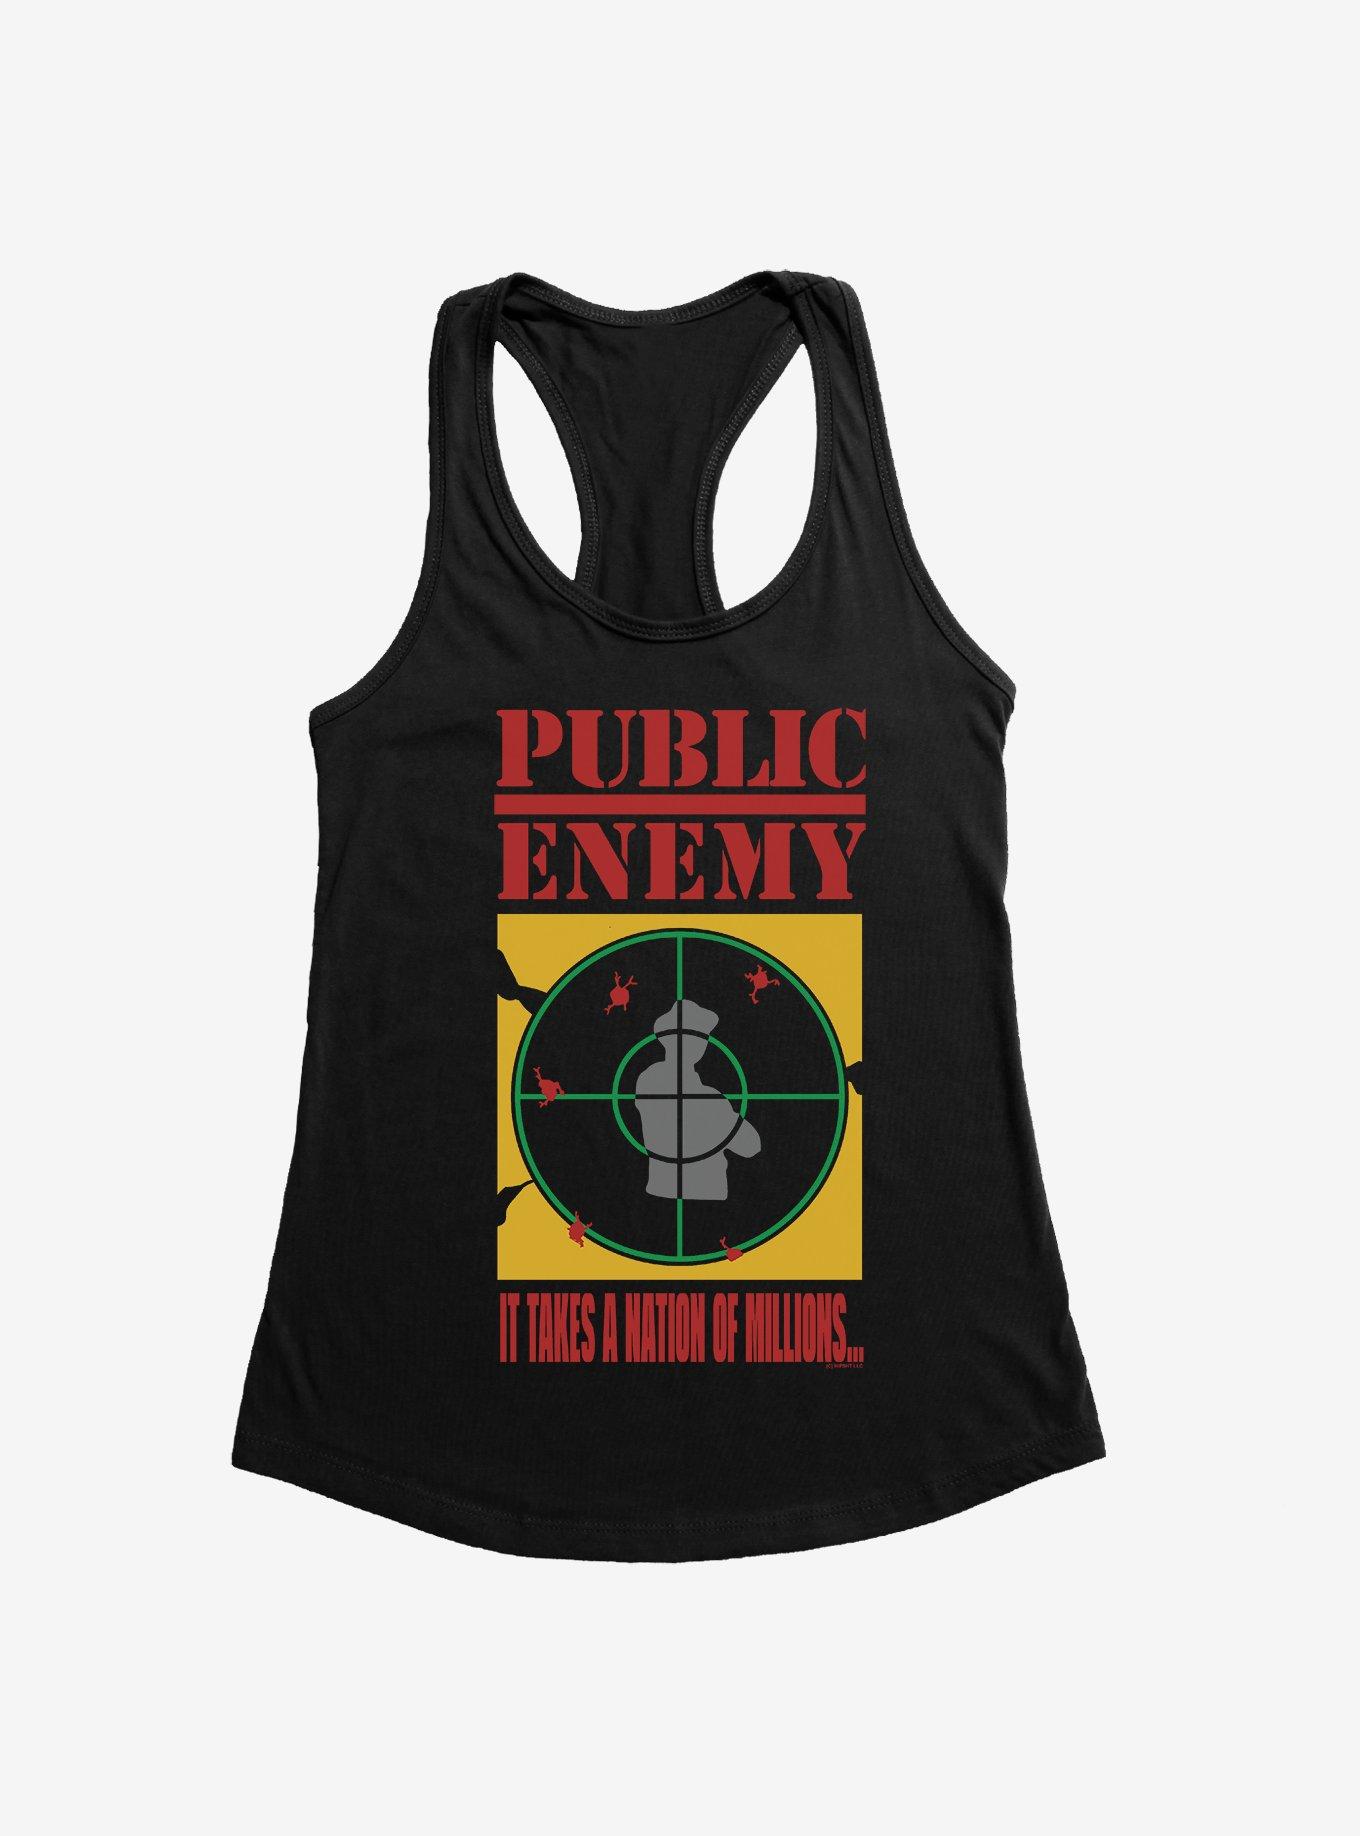 Public Enemy Takes A Nation Of Millions Girls Tank